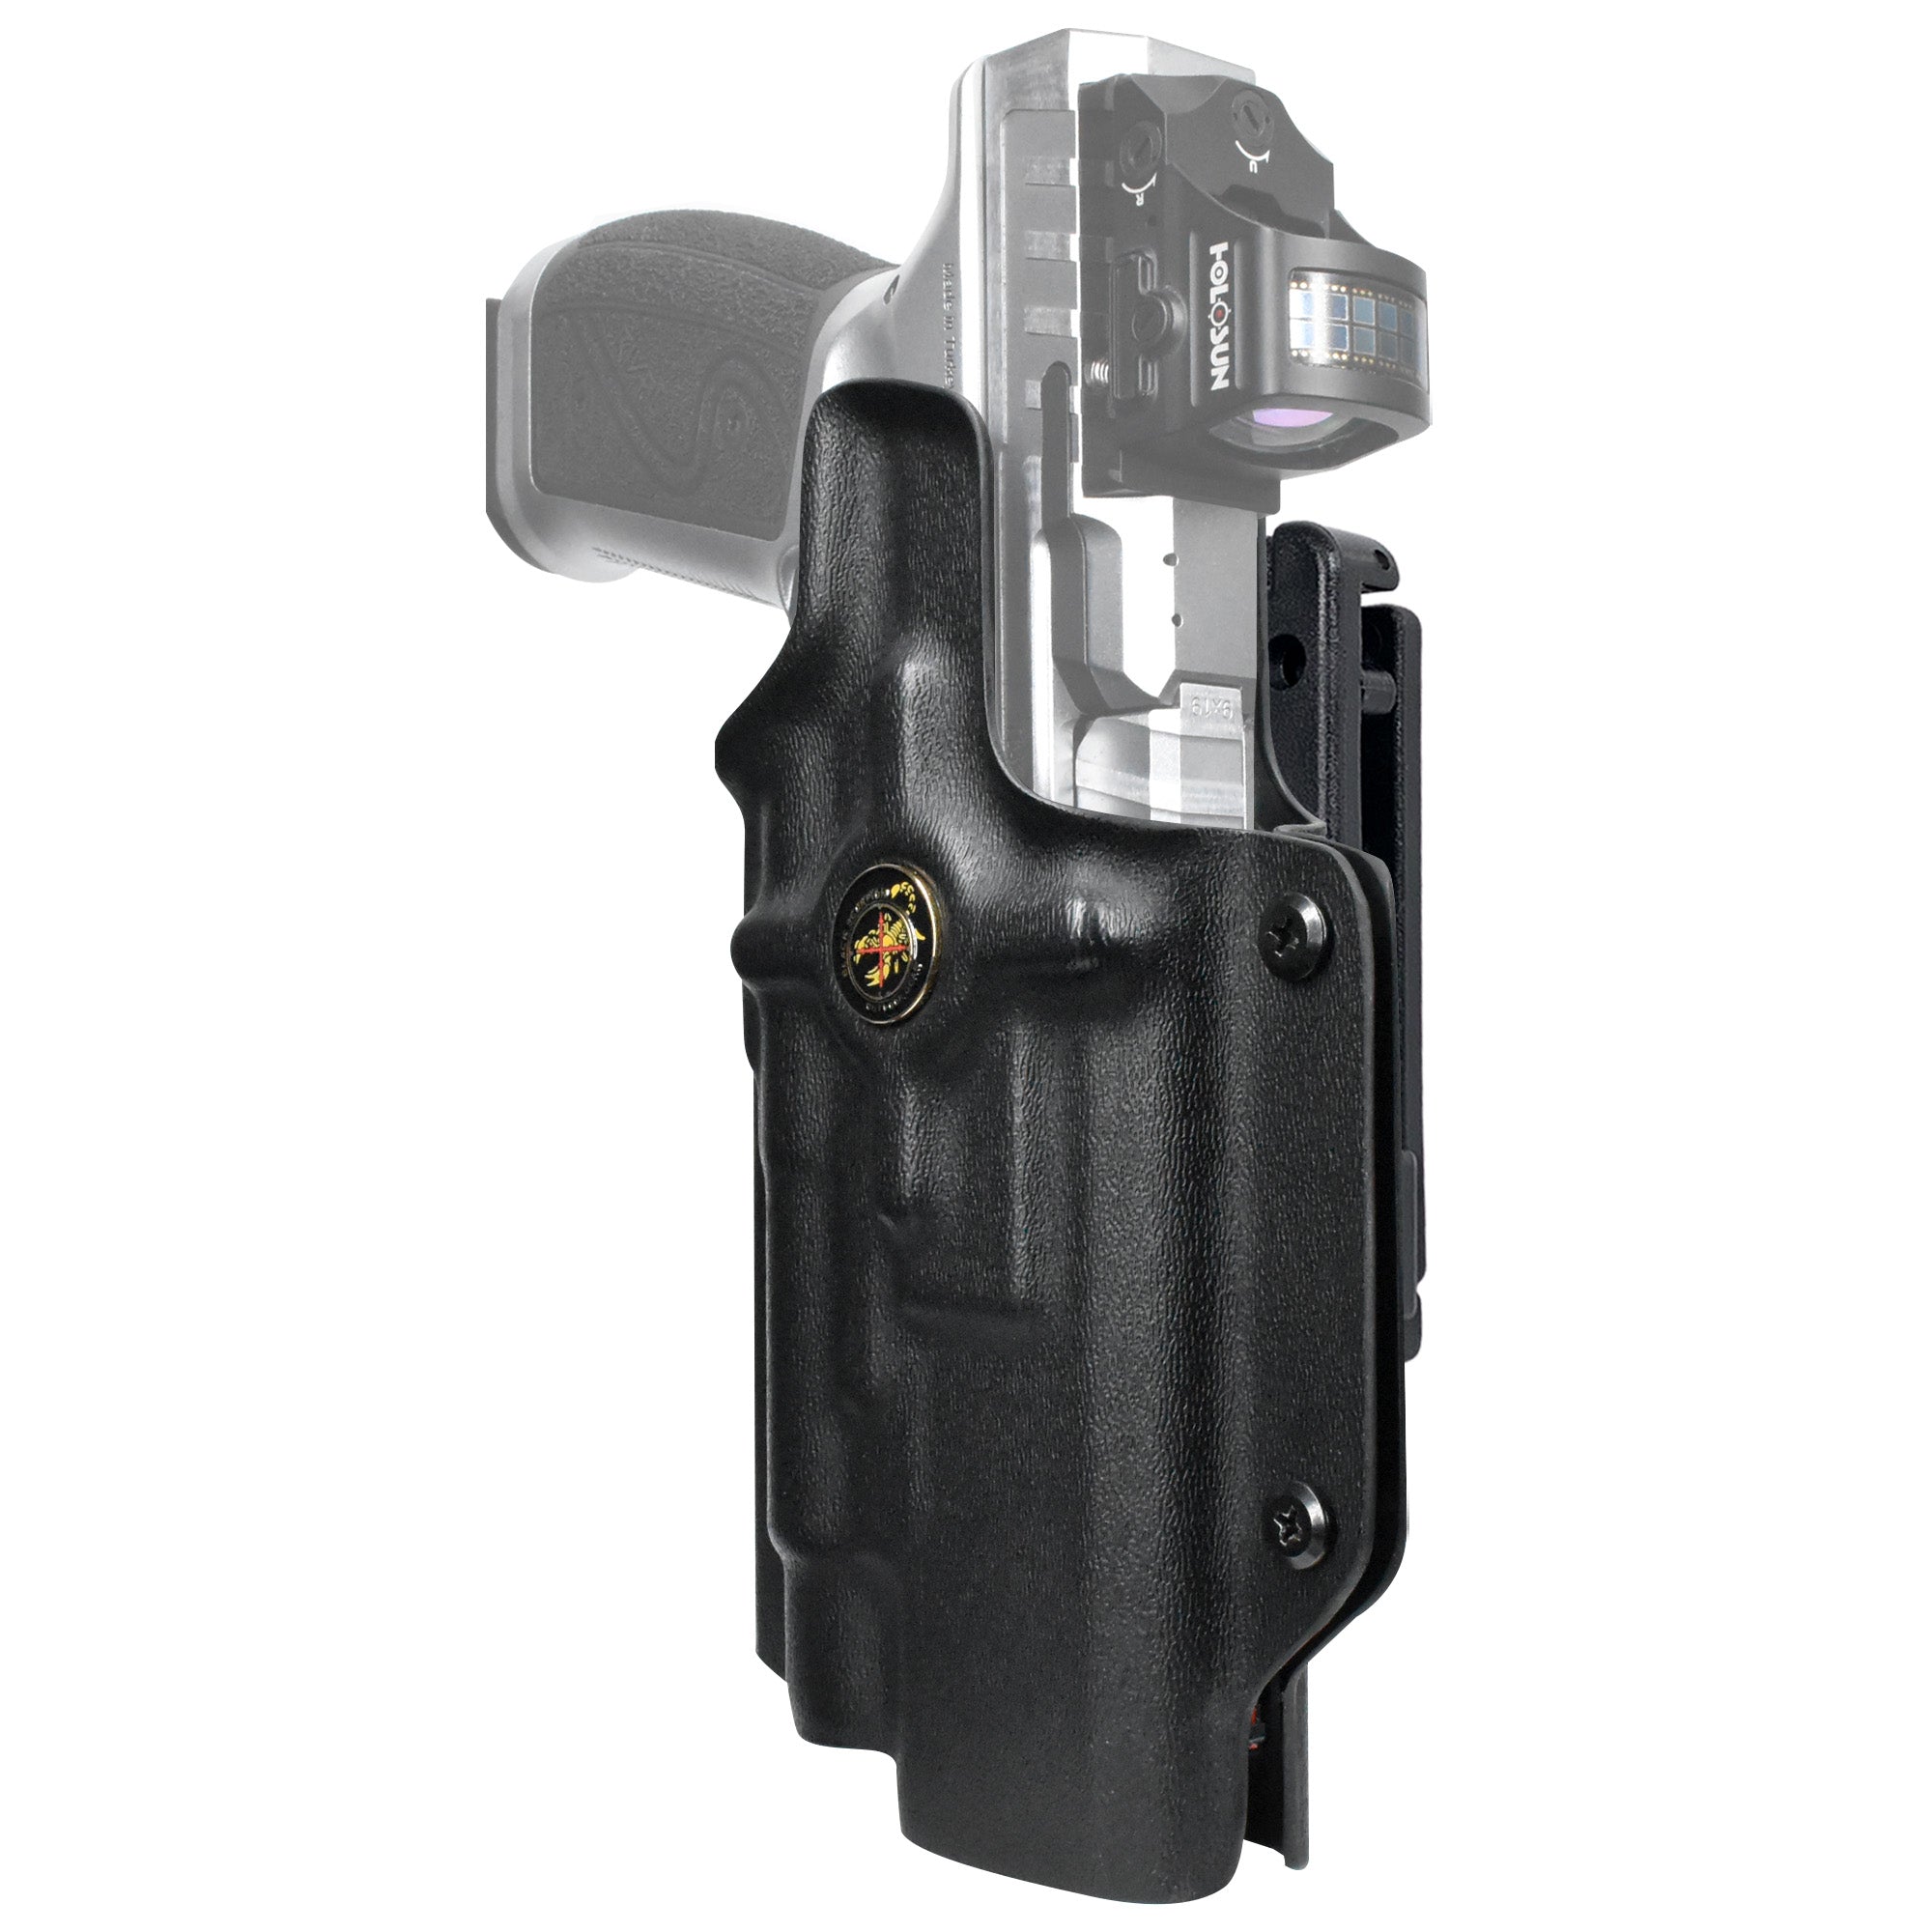 Pro IDPA Competition Holster for CZ Shadow 2 w/ Streamlight TLR-1 HL in Black